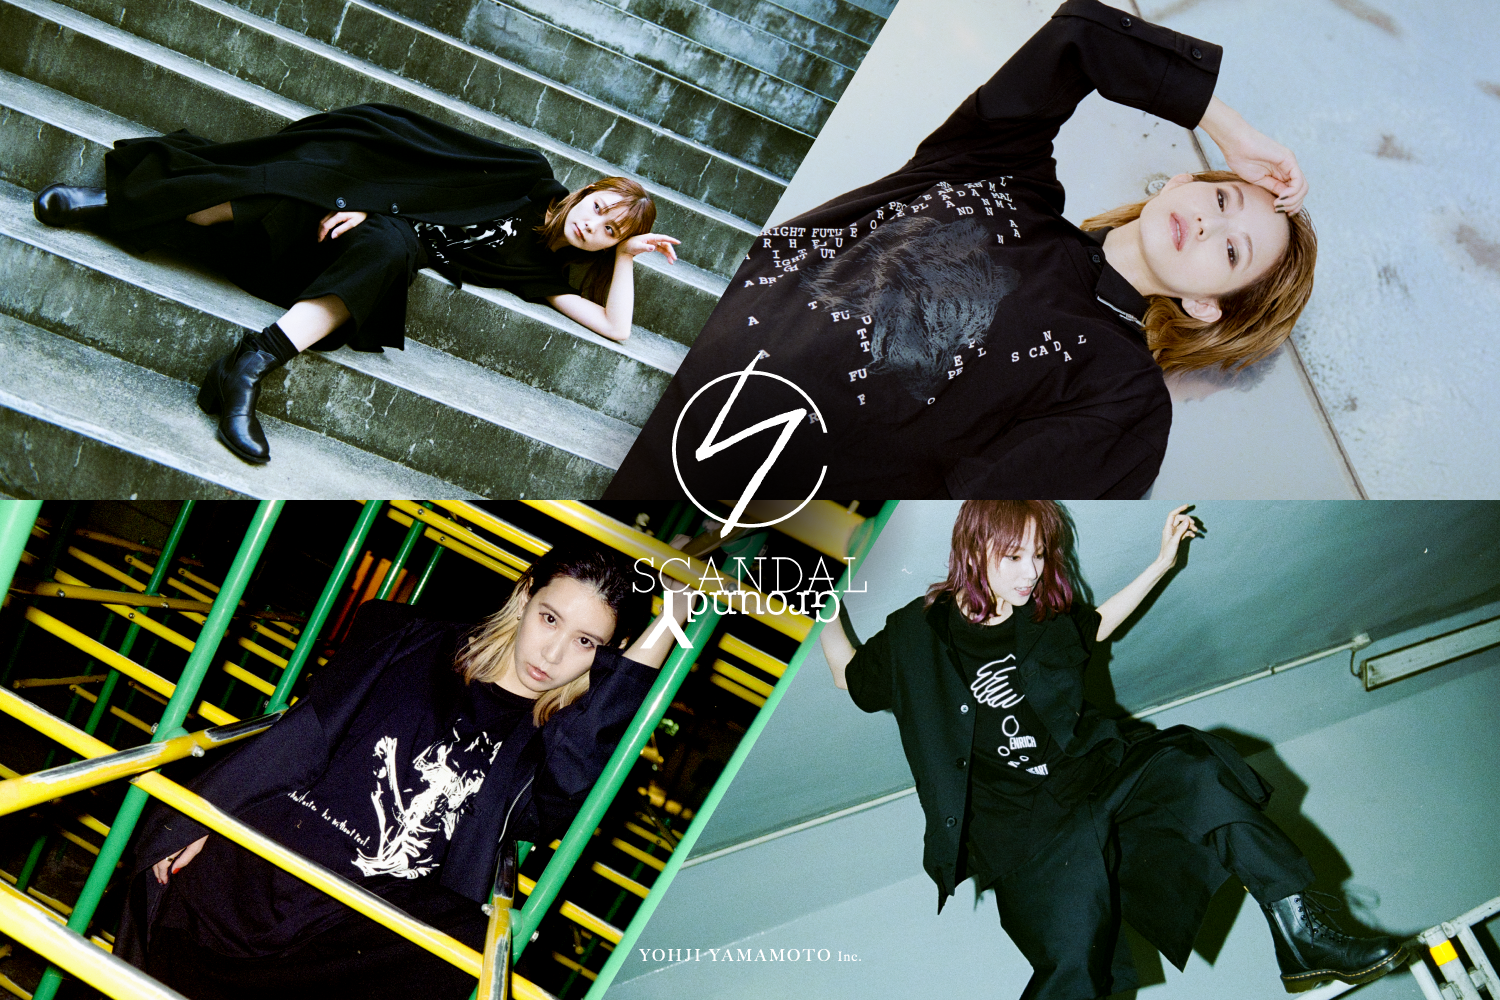 Ground Y × SCANDAL COLLECTION “MESSAGE“ Main